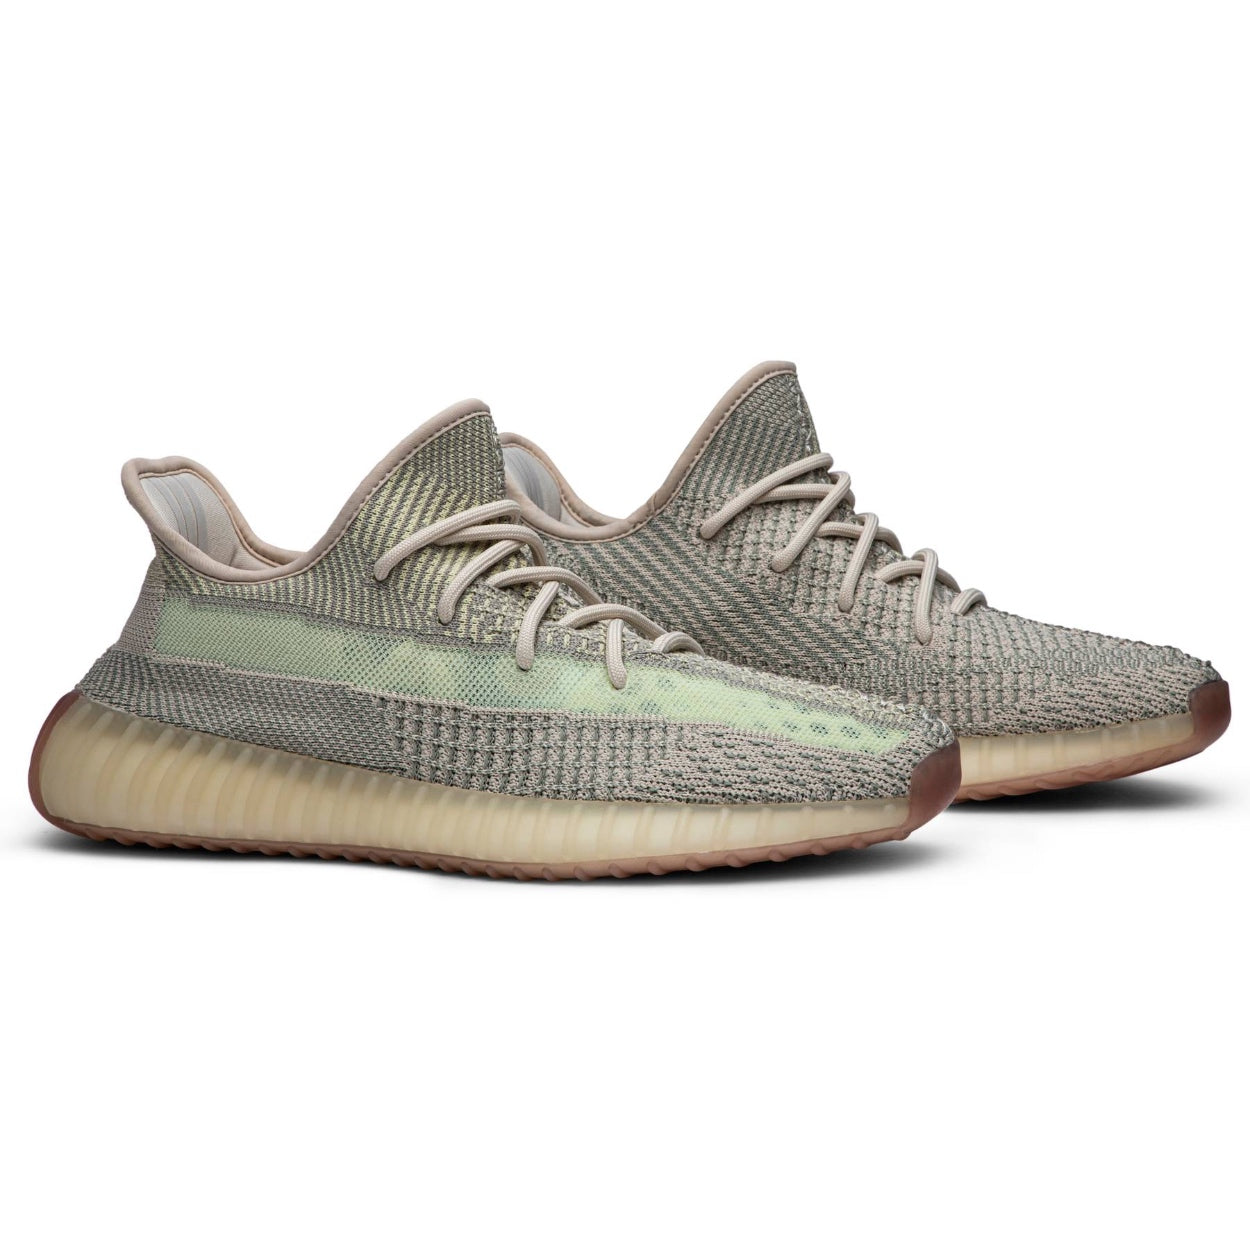 adidas Yeezy Boost 350 V2 'Citrin Reflective' - After Burn